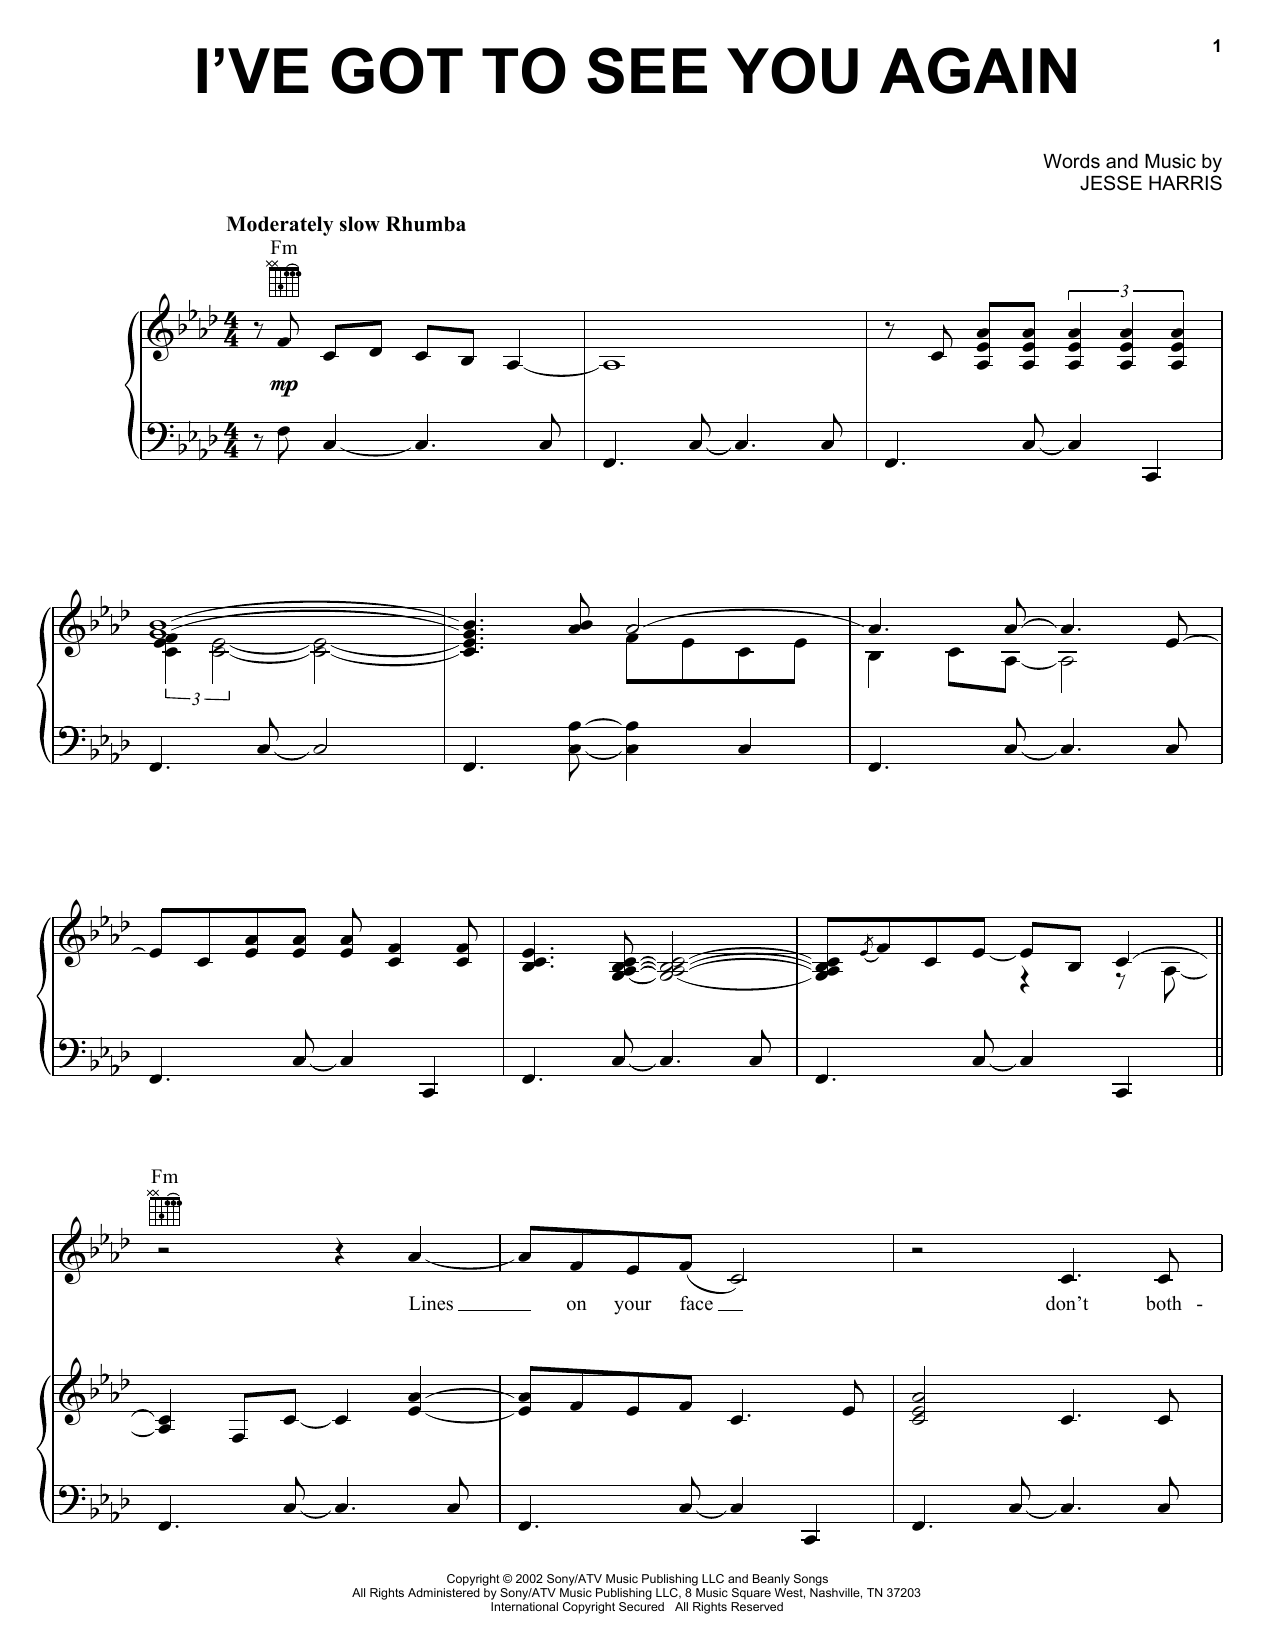 Norah Jones I've Got To See You Again sheet music notes and chords. Download Printable PDF.